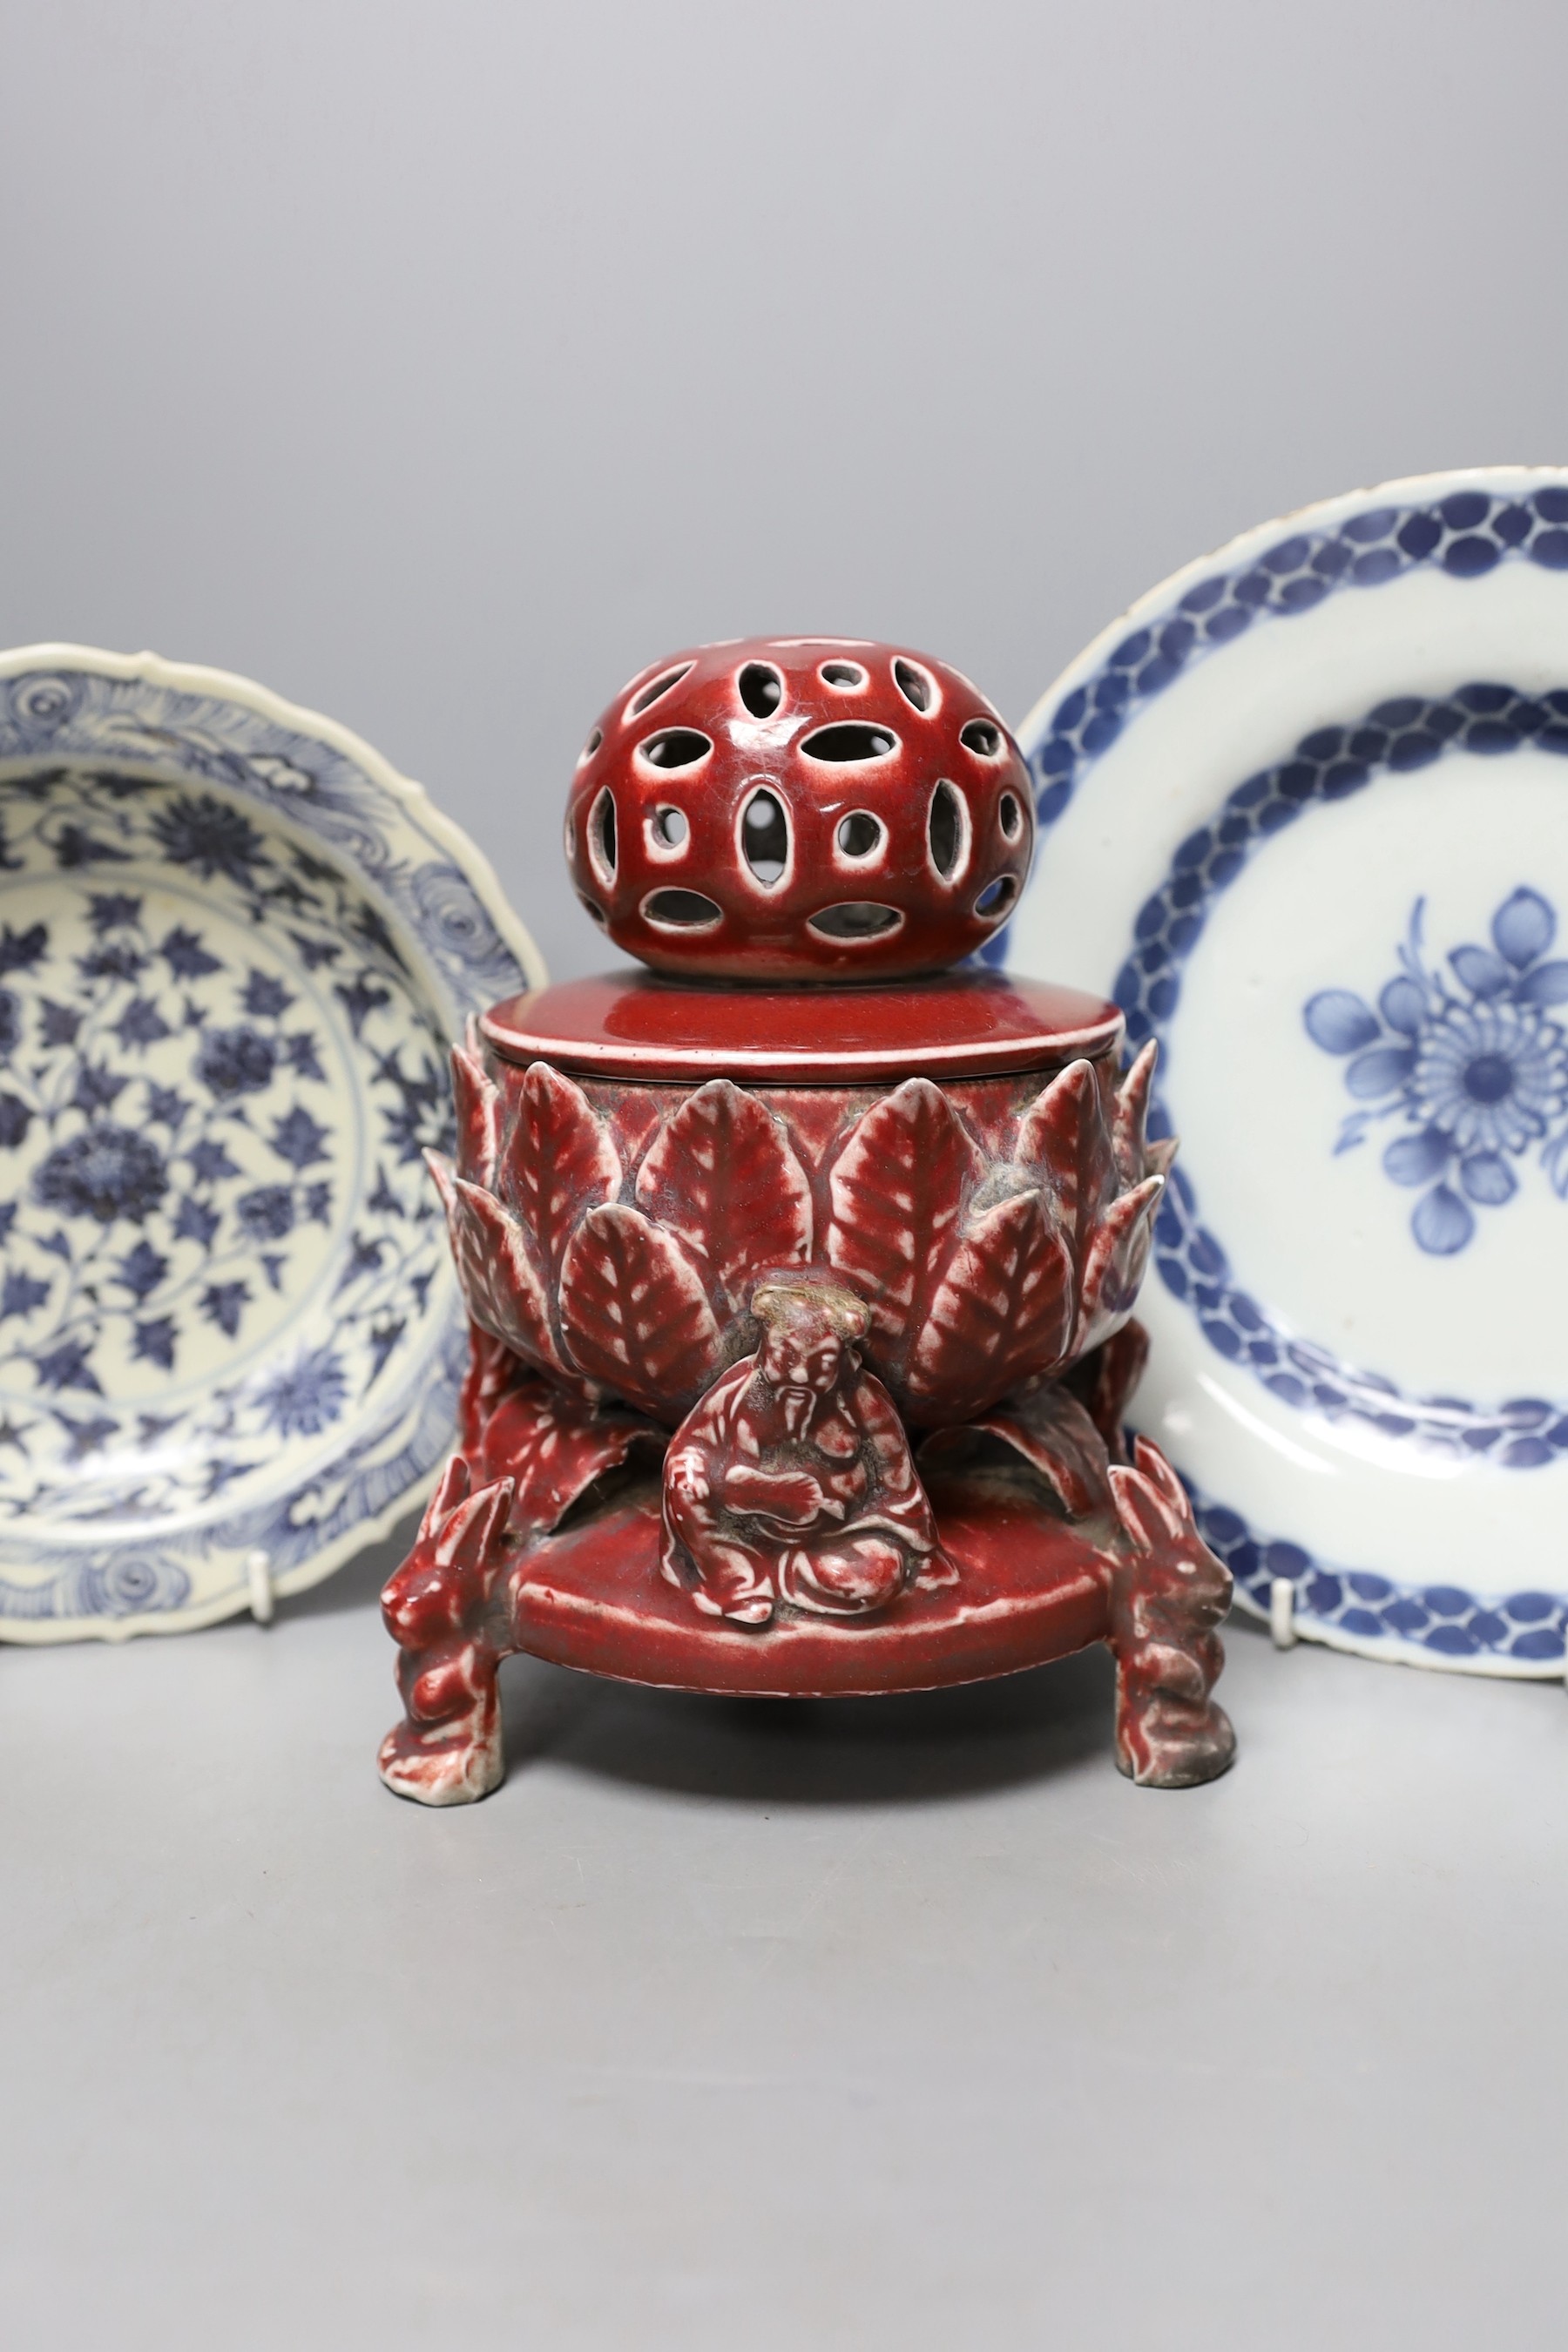 A Chinese sang-de-boeuf glazed pottery incense burner, 21cm high, s similar blue and white bowl and a famille rose footed dish together with a Delft plate.